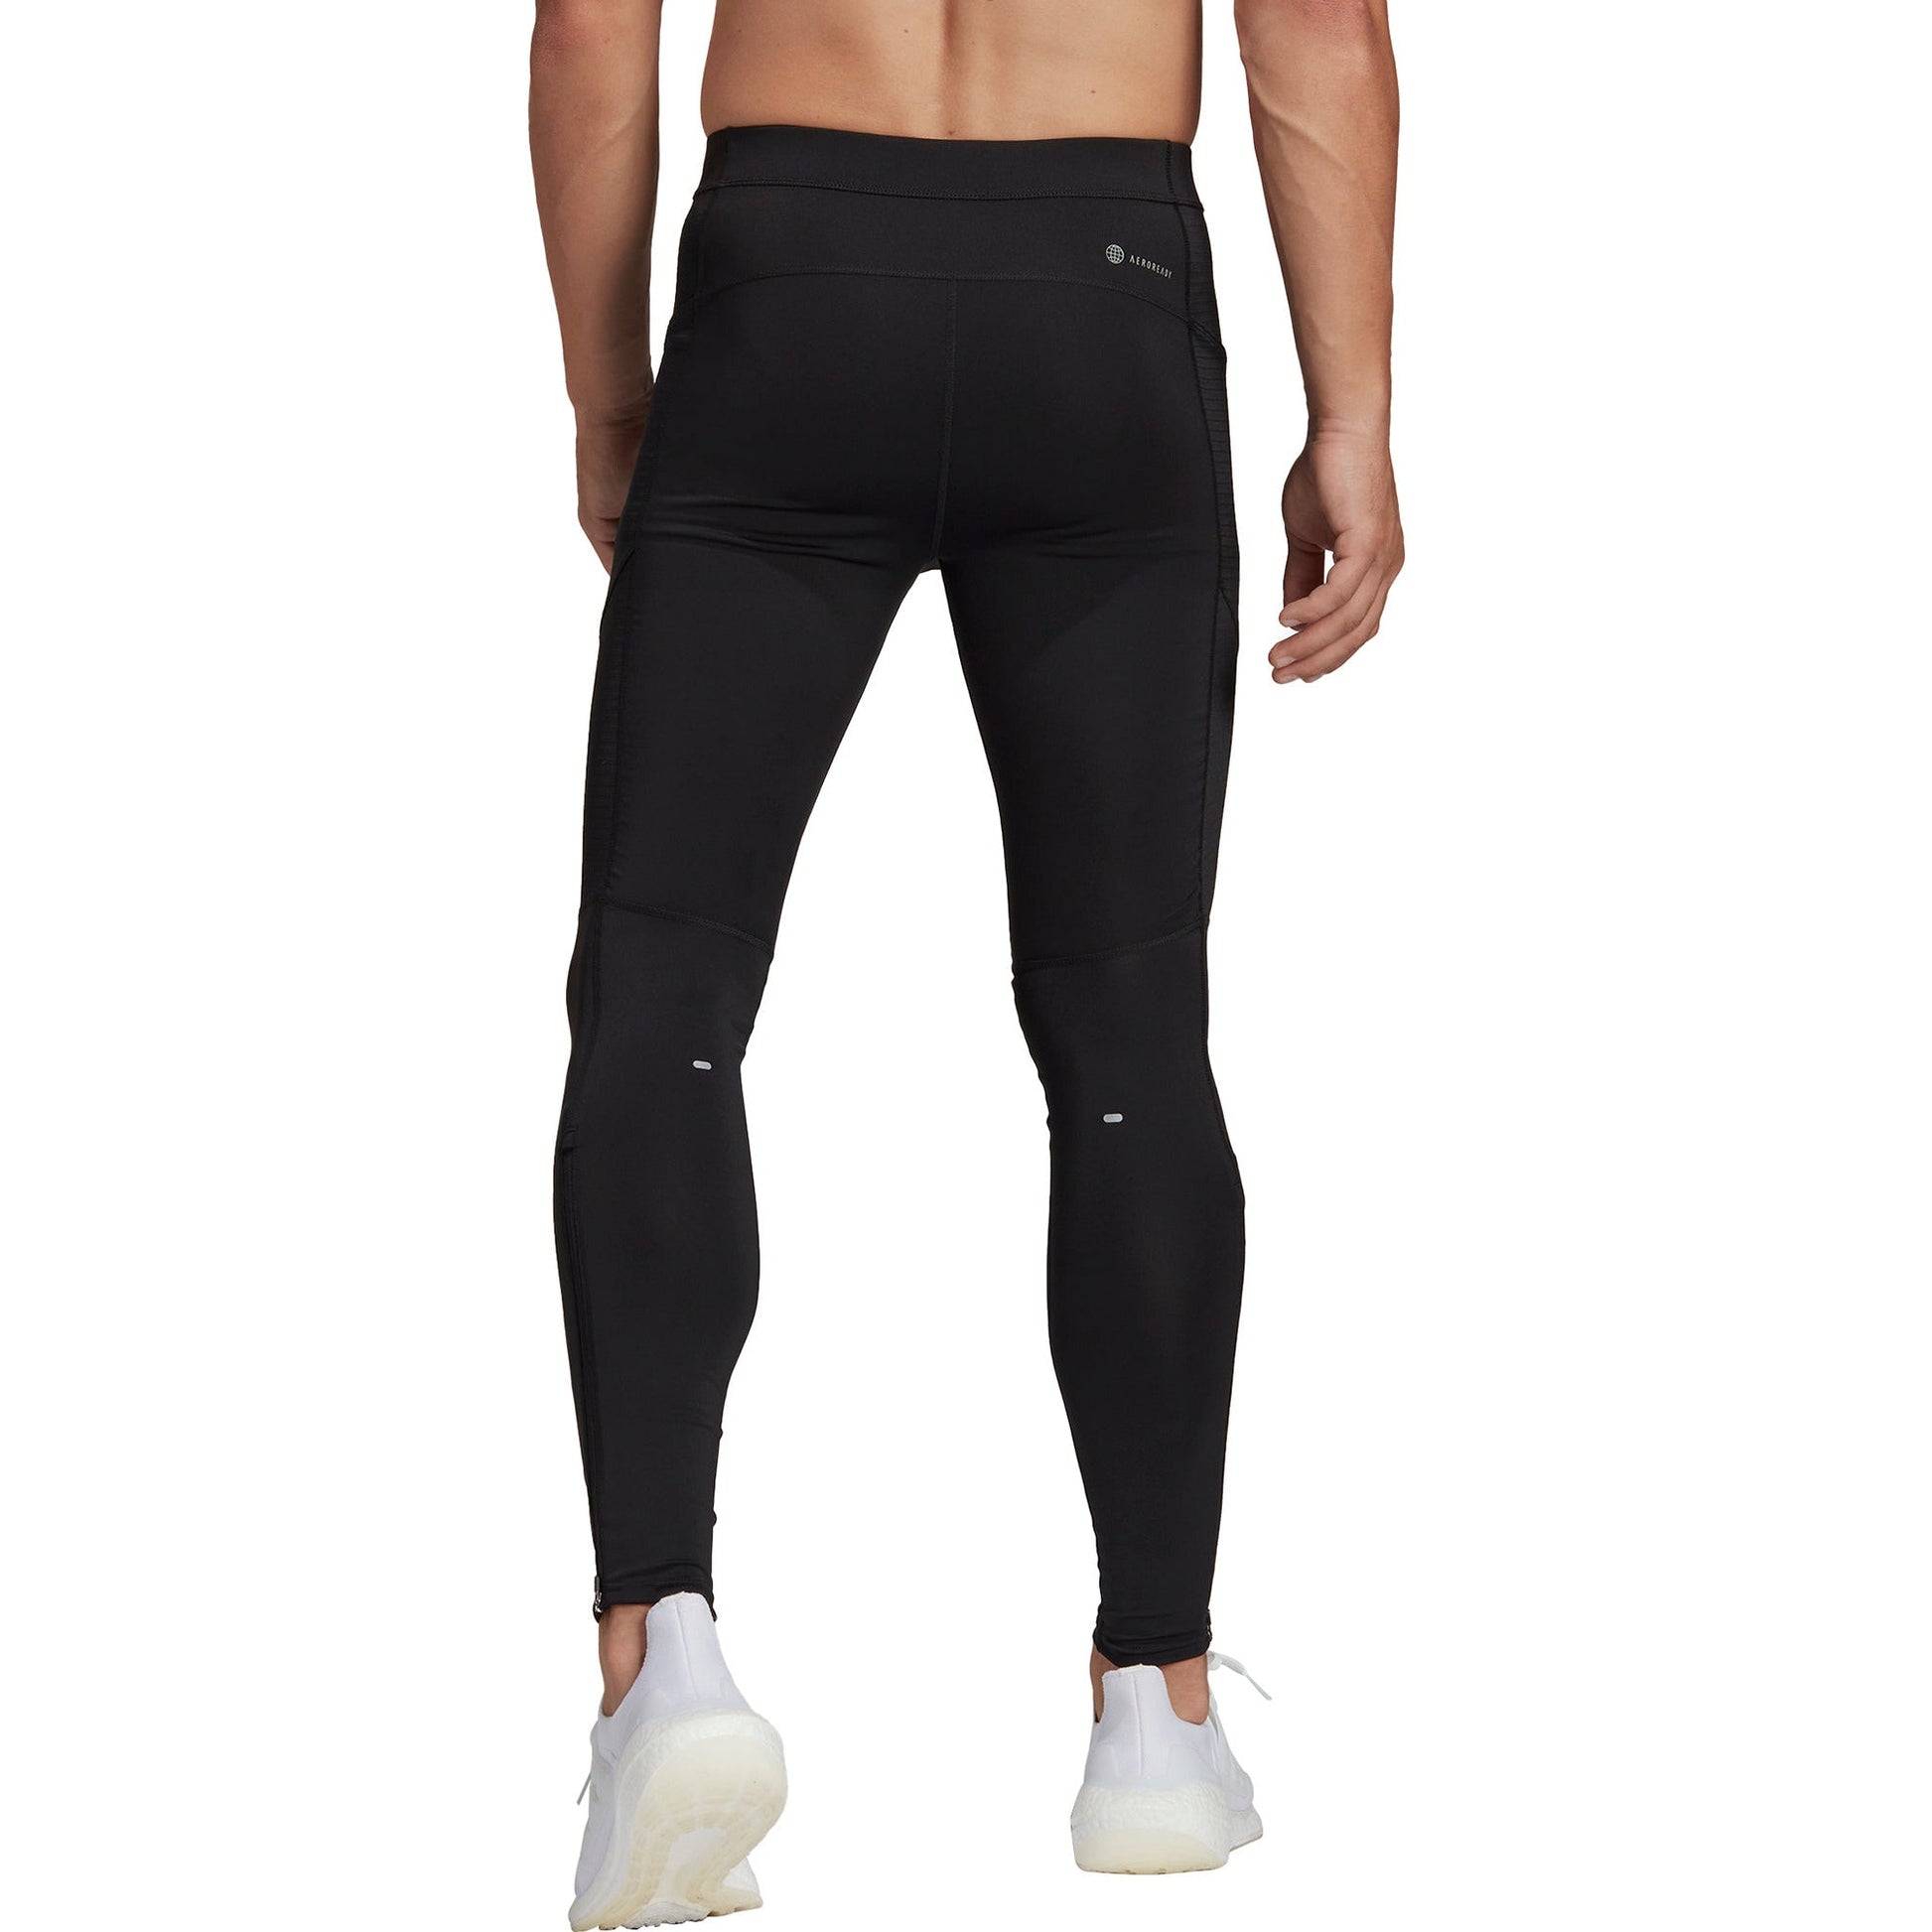 Adidas Own The Run Long Tights Hm8444 Back View